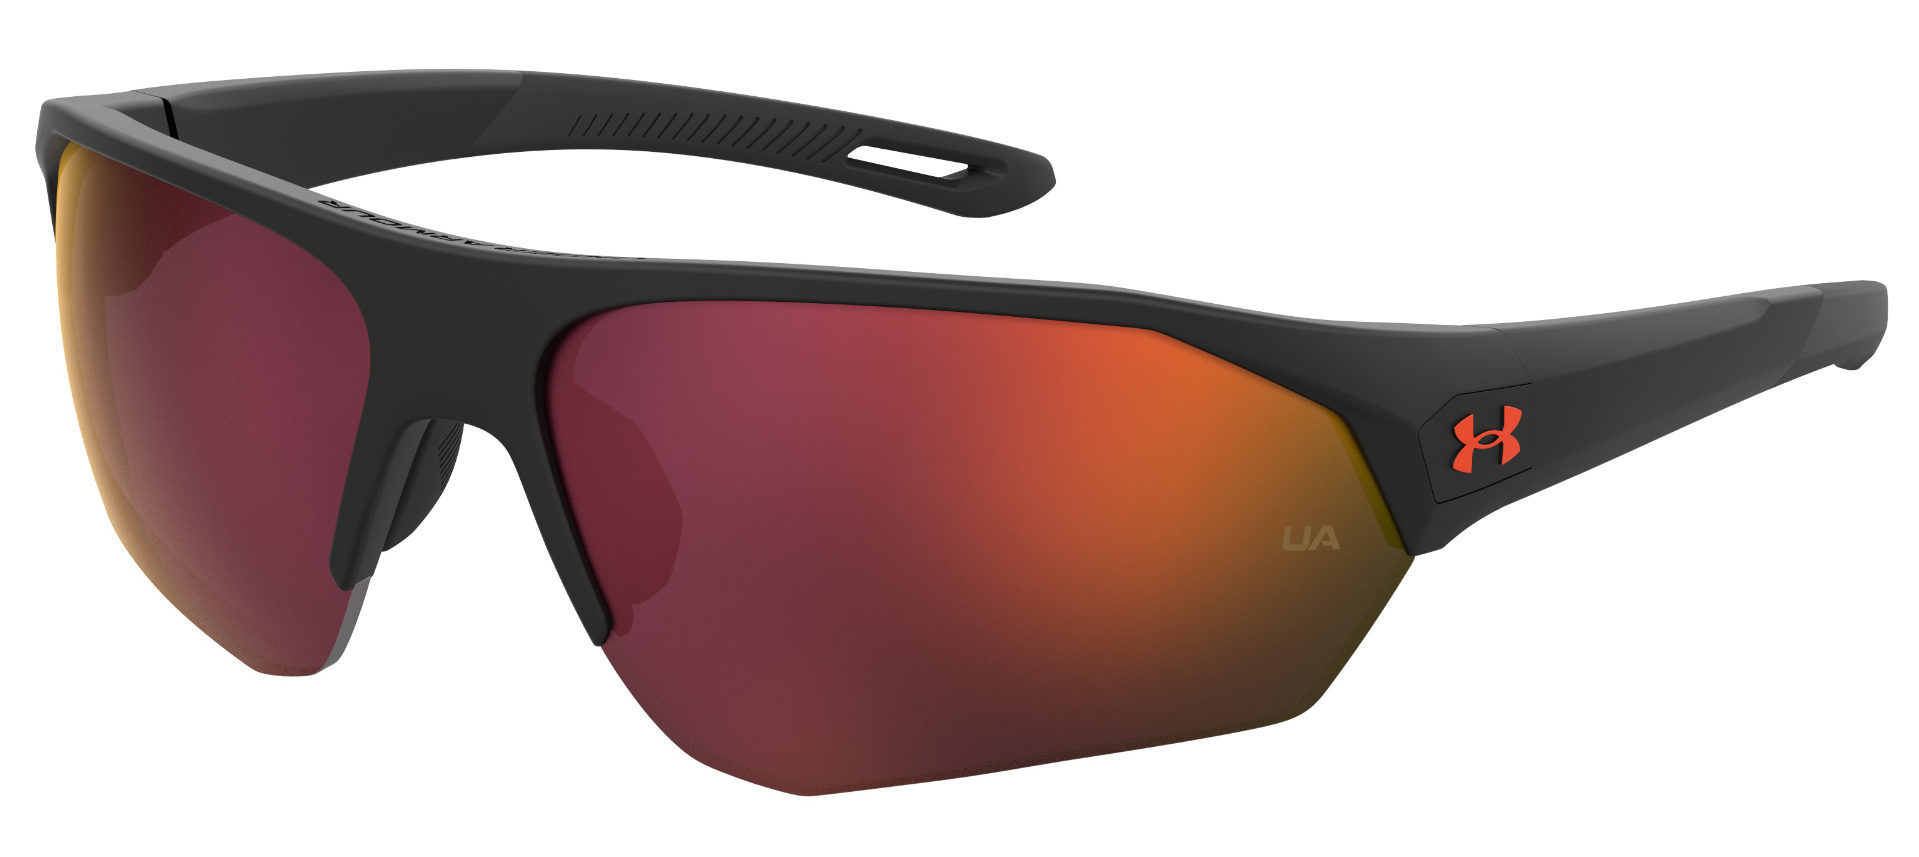 Under Armour Playmaker sunglasses in matte black with red logo and orange mirror lenses.